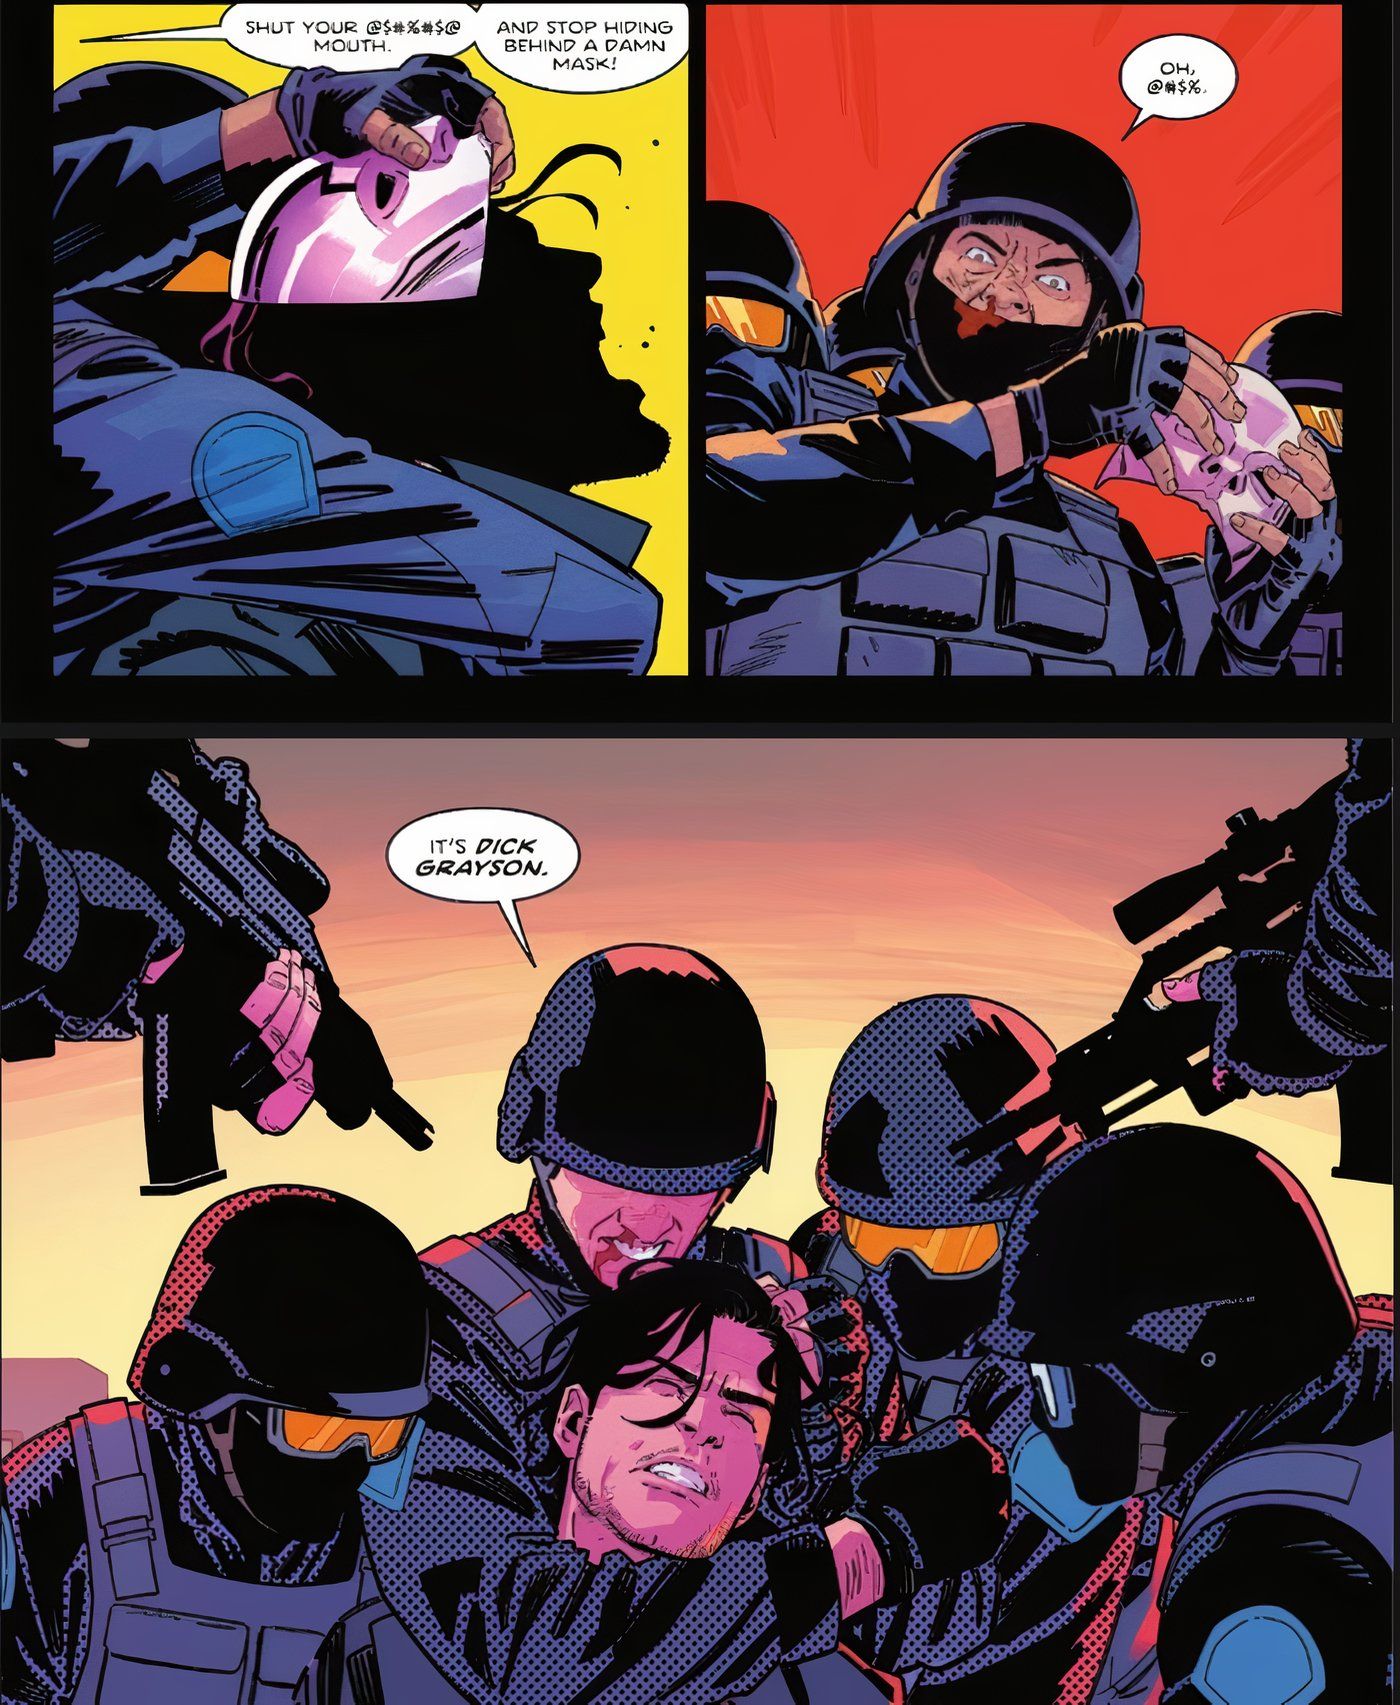 Nightwing #115 Dick Grayson being unmasked as the villain Heartless